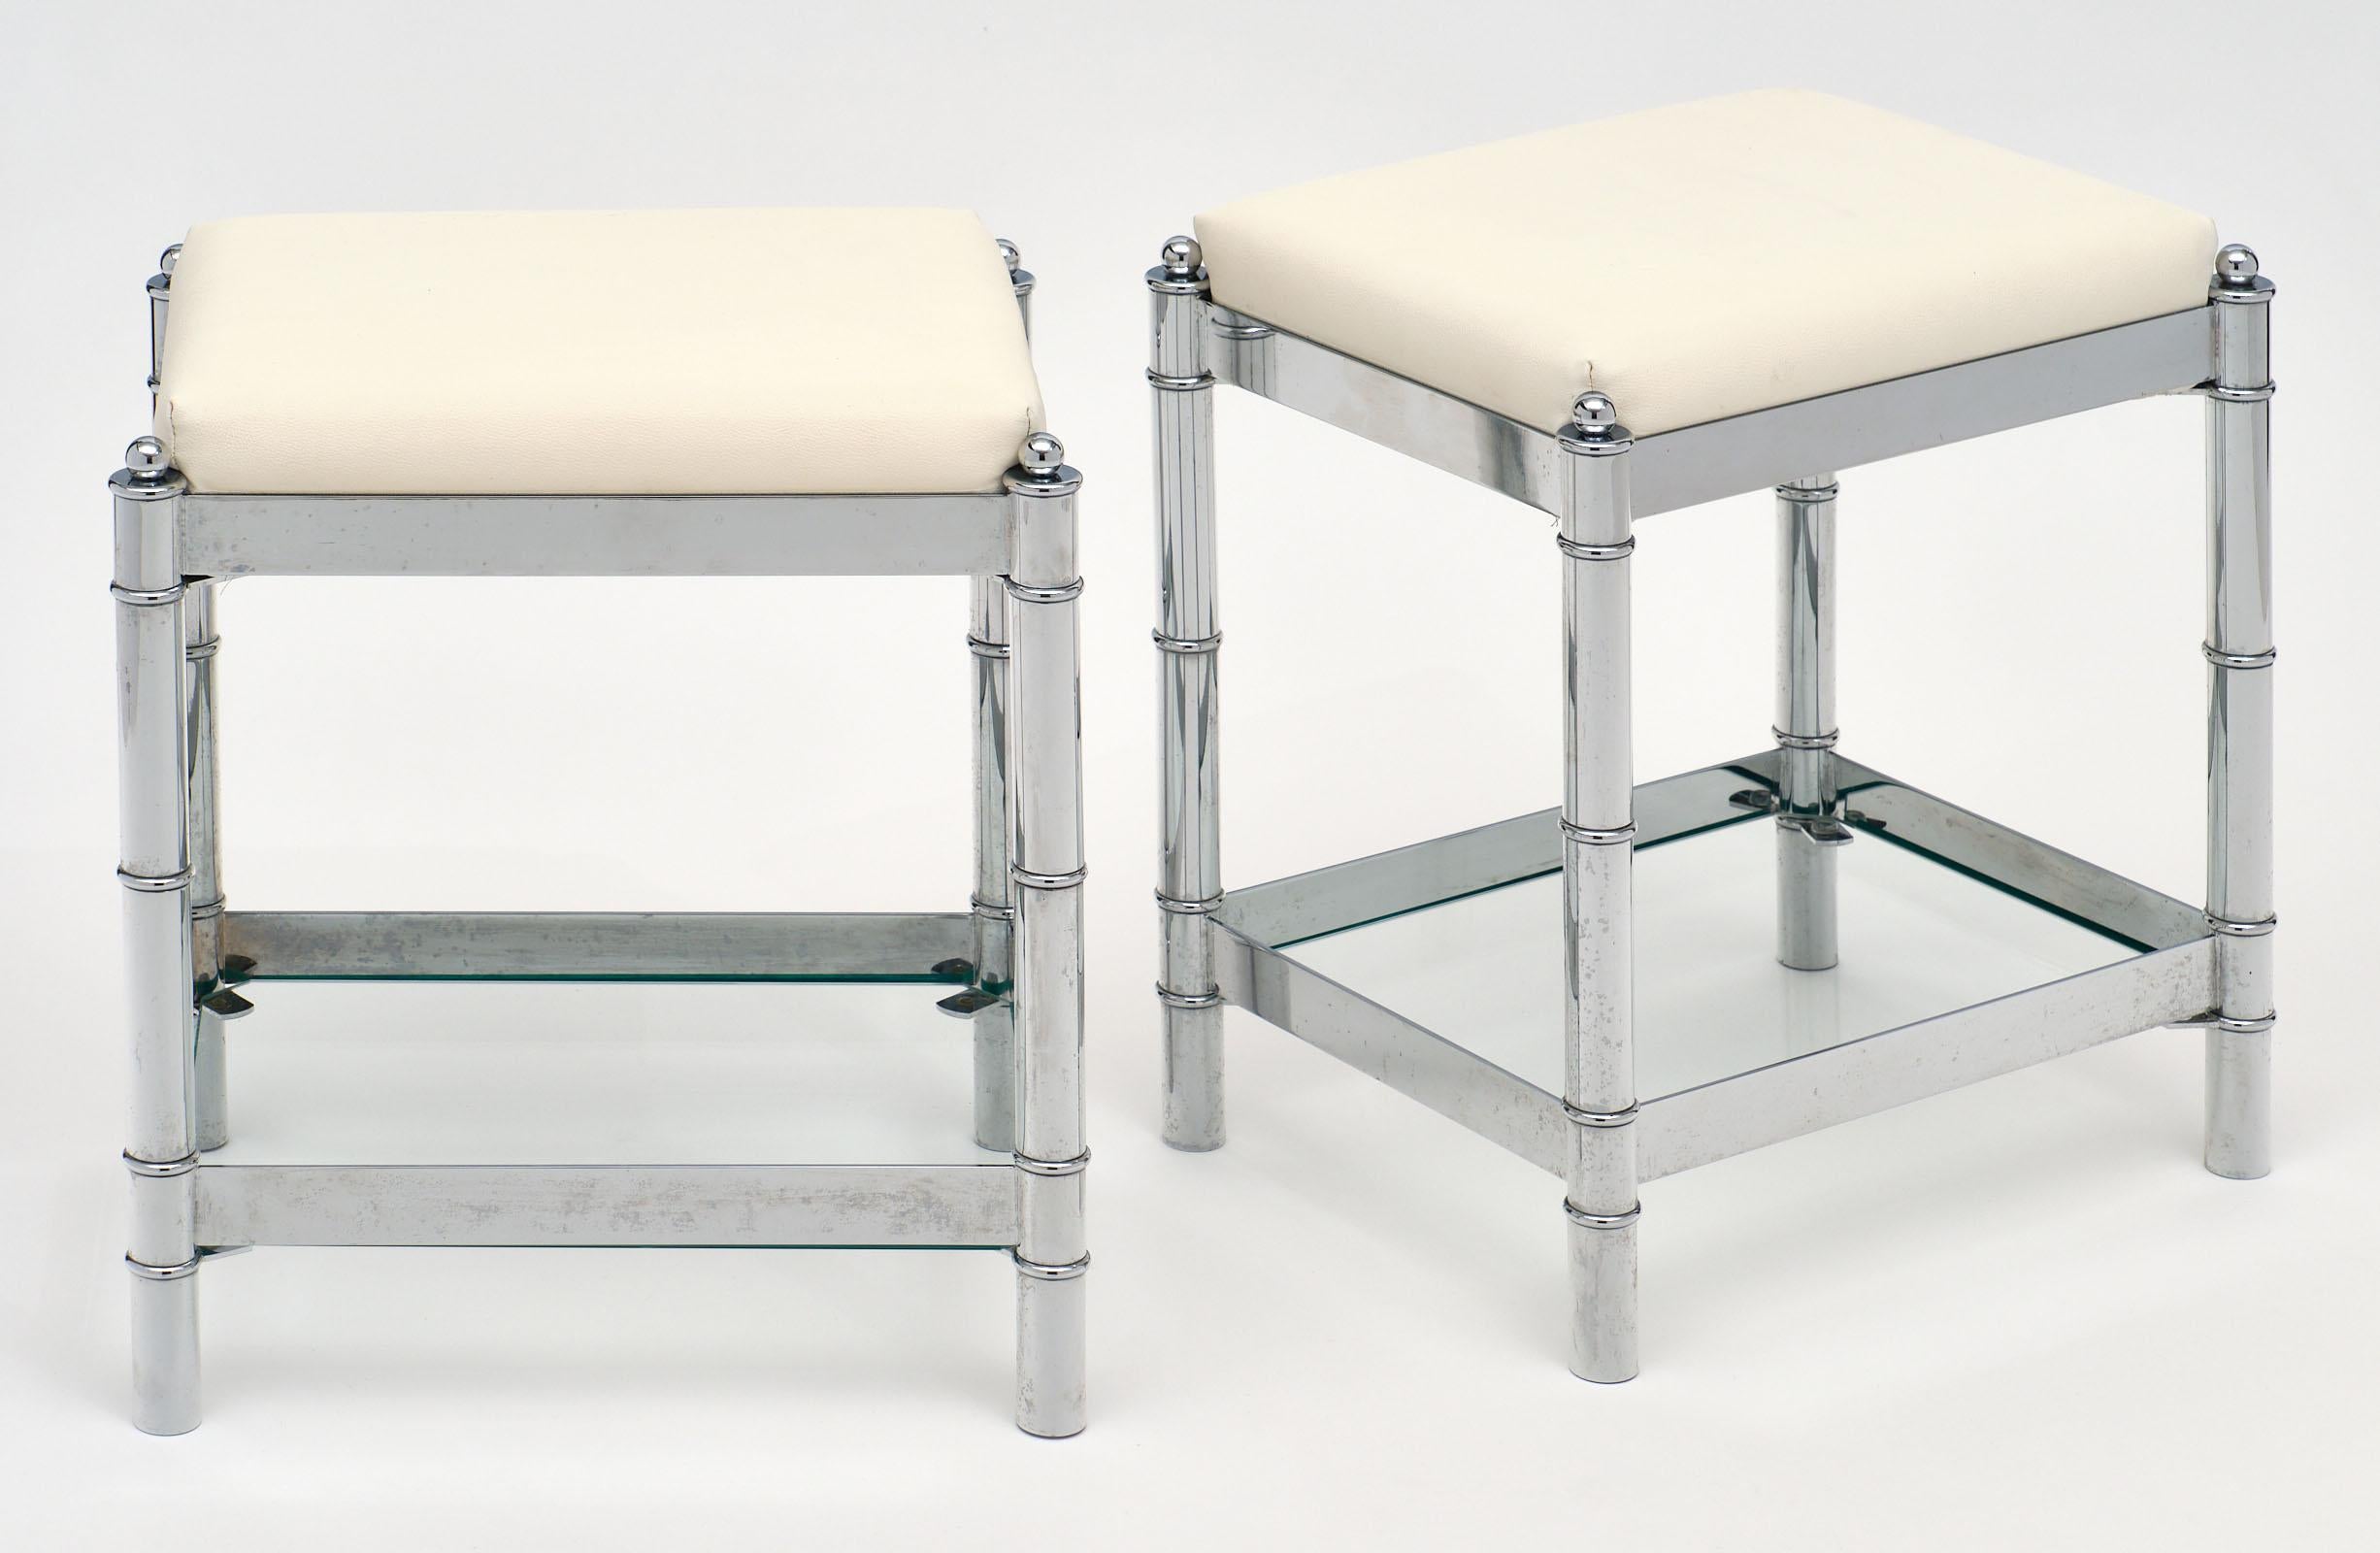 Pair of modernist chrome Italian stools with stylized bamboo chromed legs. Each stool features a clear glass lower tier for functionality. There are four of these stools available in all, priced per pair.